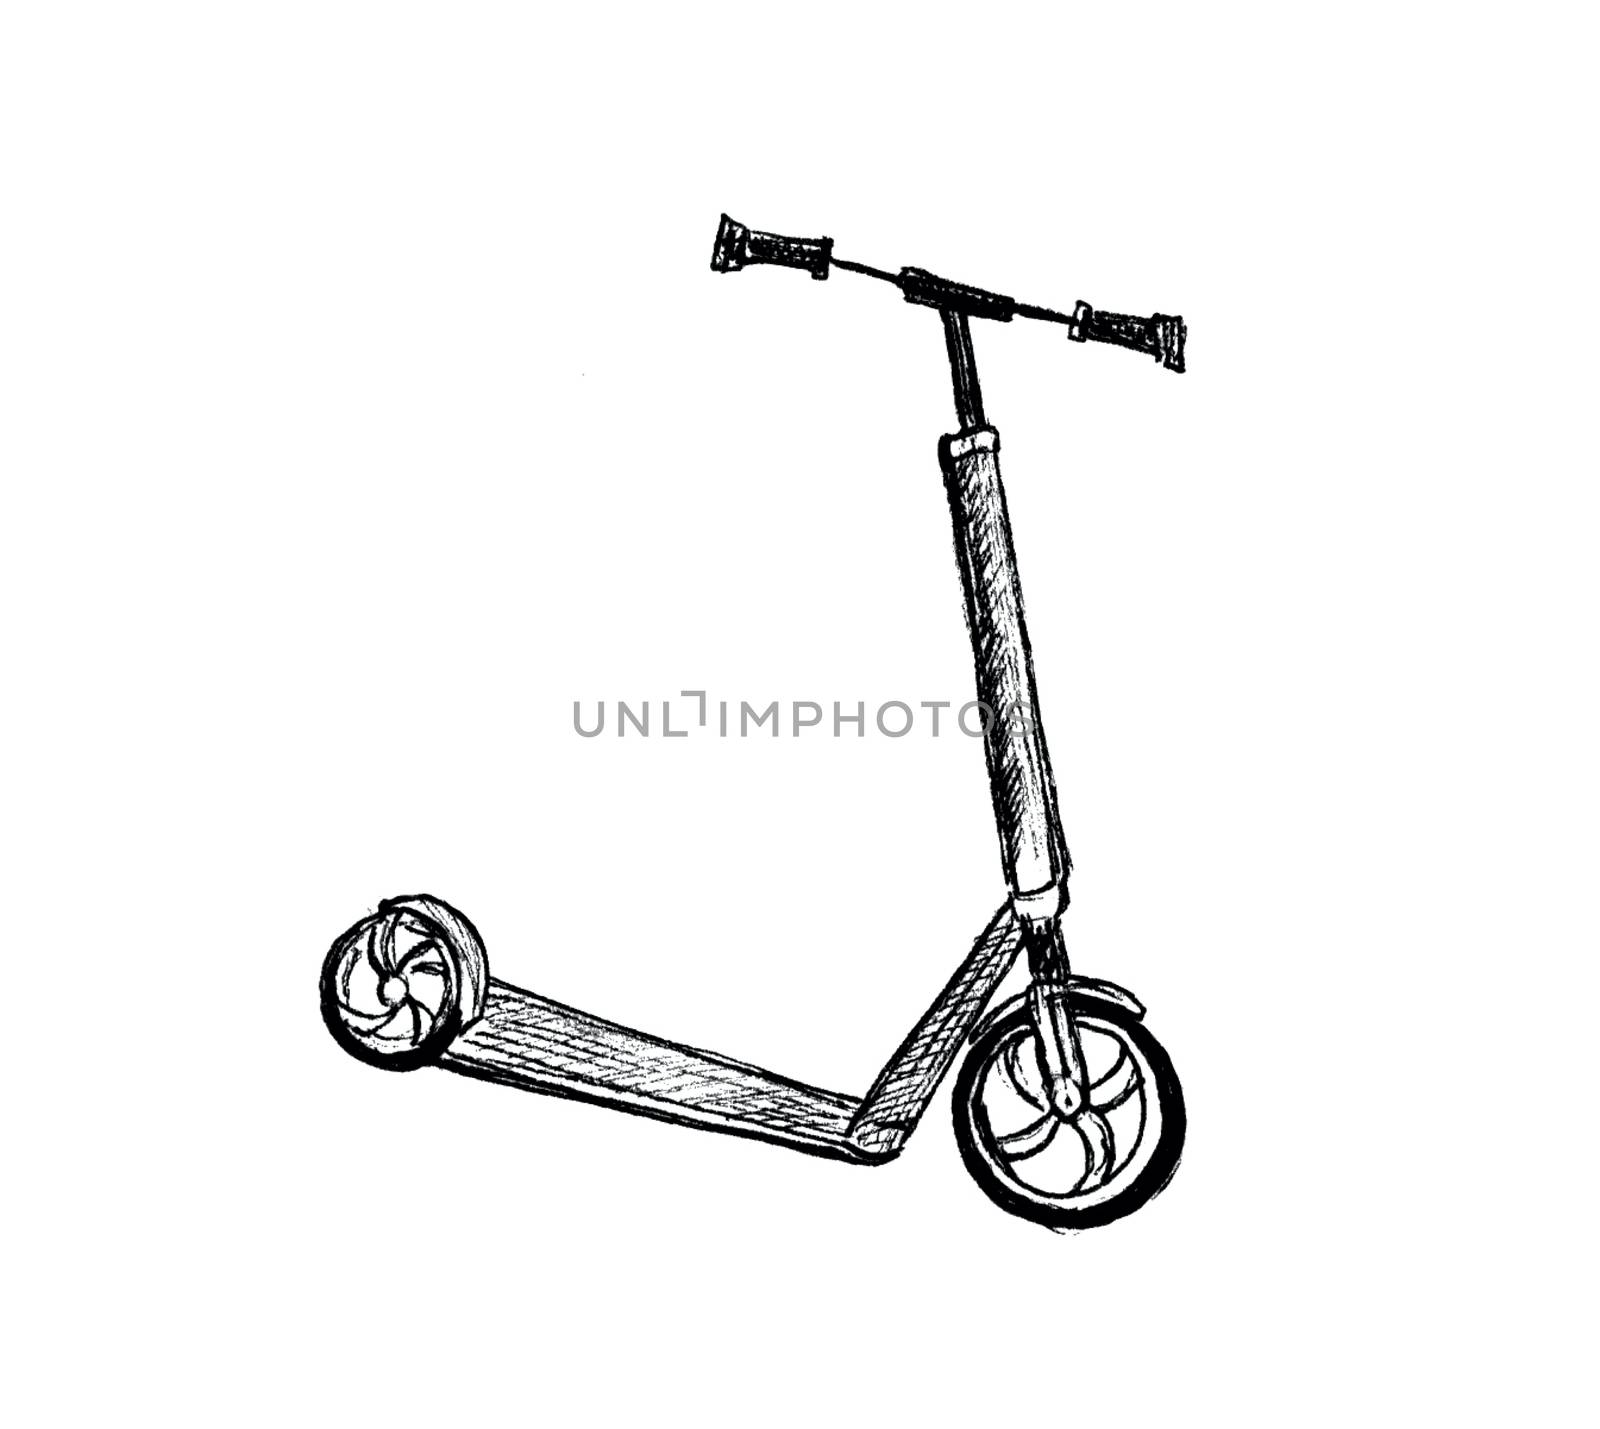 Scooter sketch isolated on white background. Eco alternative transport concept. Han-drawn illustration by sshisshka